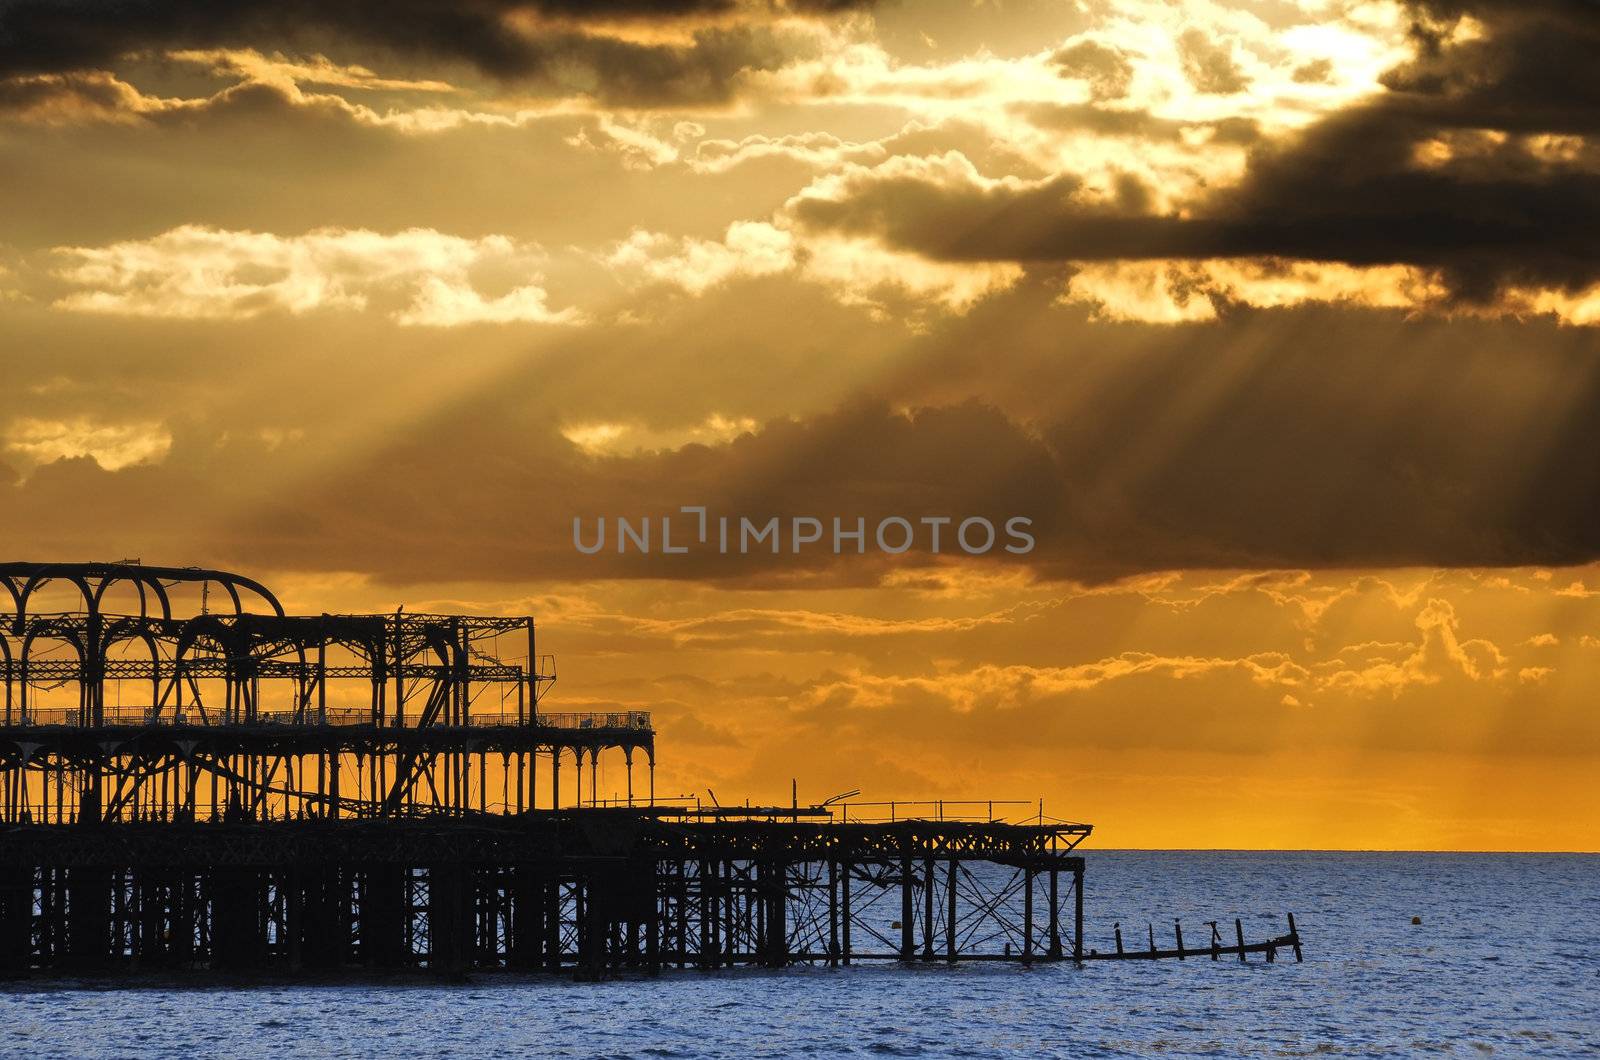 The West Pier in Brighton at sunset, UK